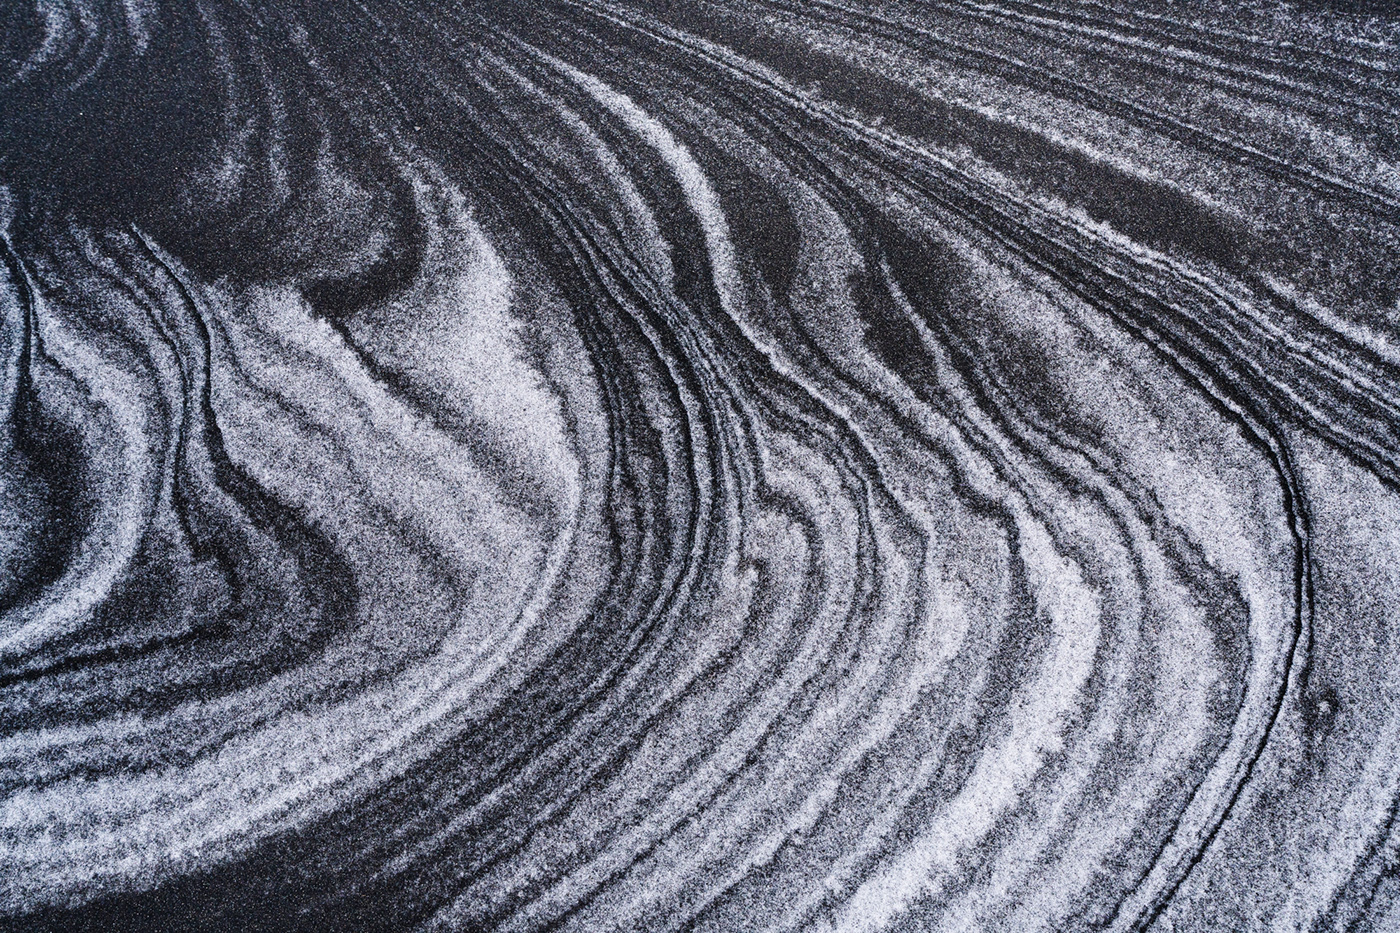 aliens iceland Patterns Abstracts Vestrahorn